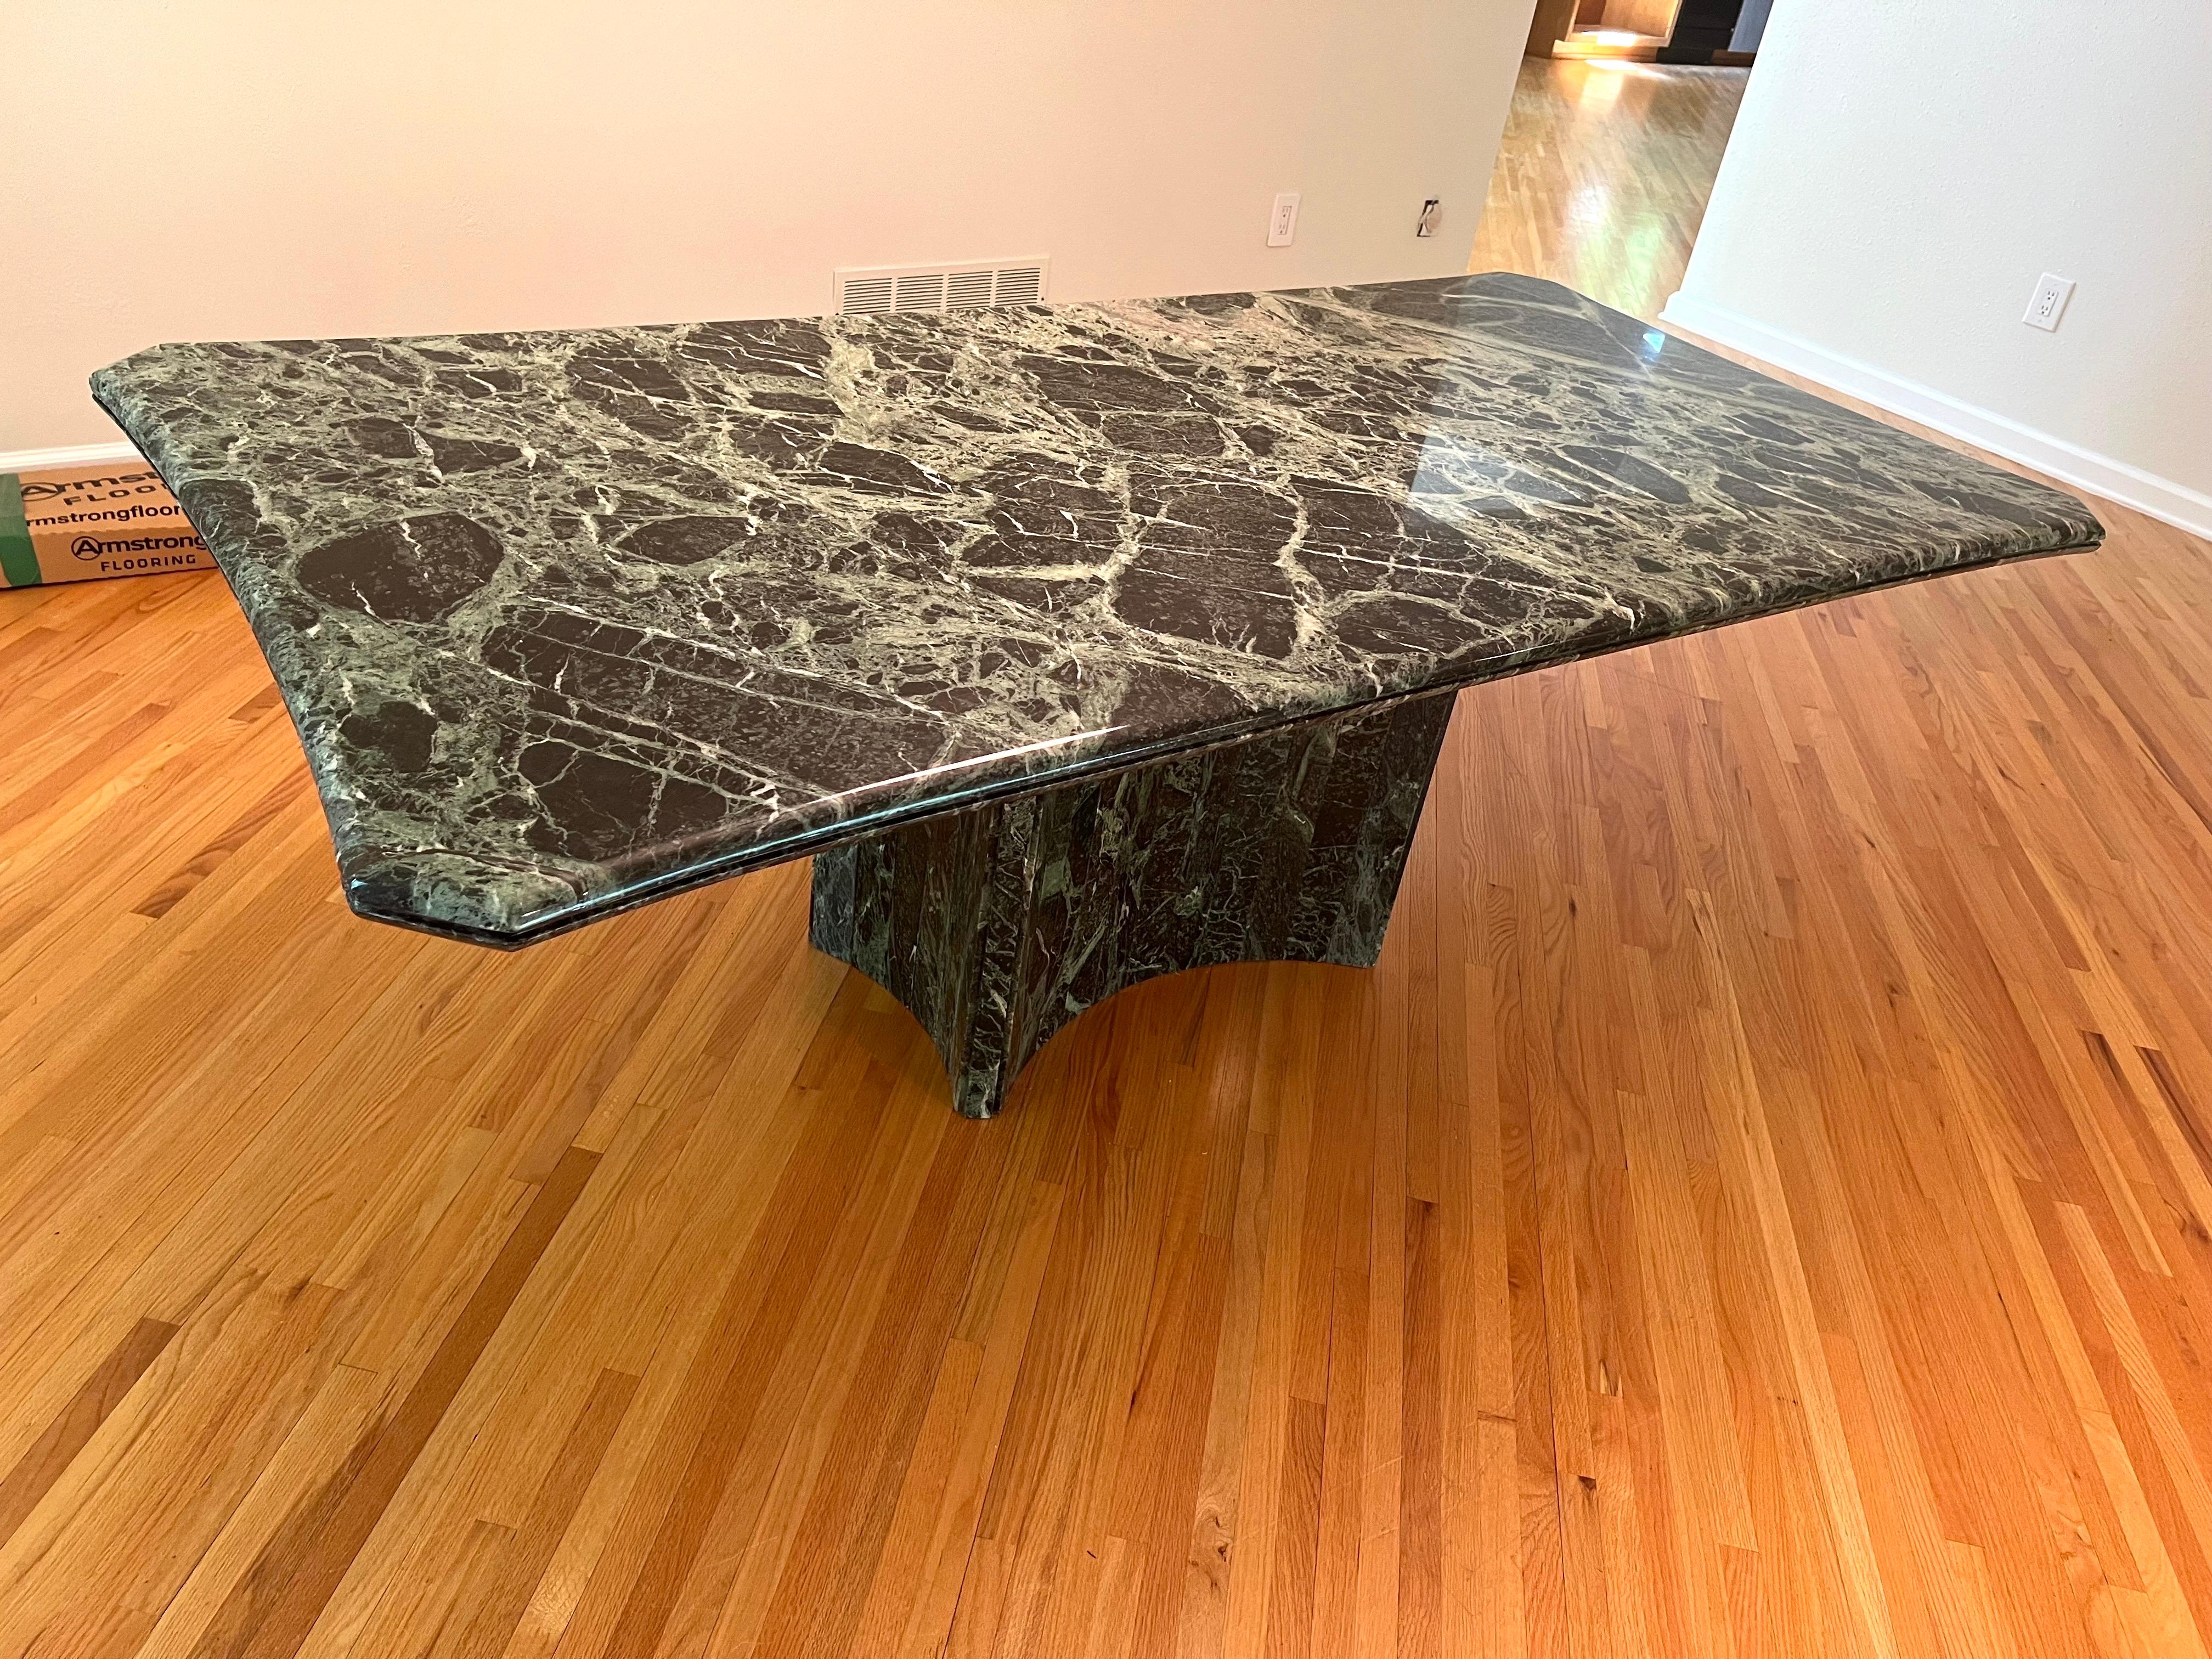 1970 Green Marble Stone Dining Table, Made in Italy

The pedestal base is made of many individual pieces of rectangular green marble that create the cascade effect, unlike other dining table base with just the flat surface pedestal.

The table top